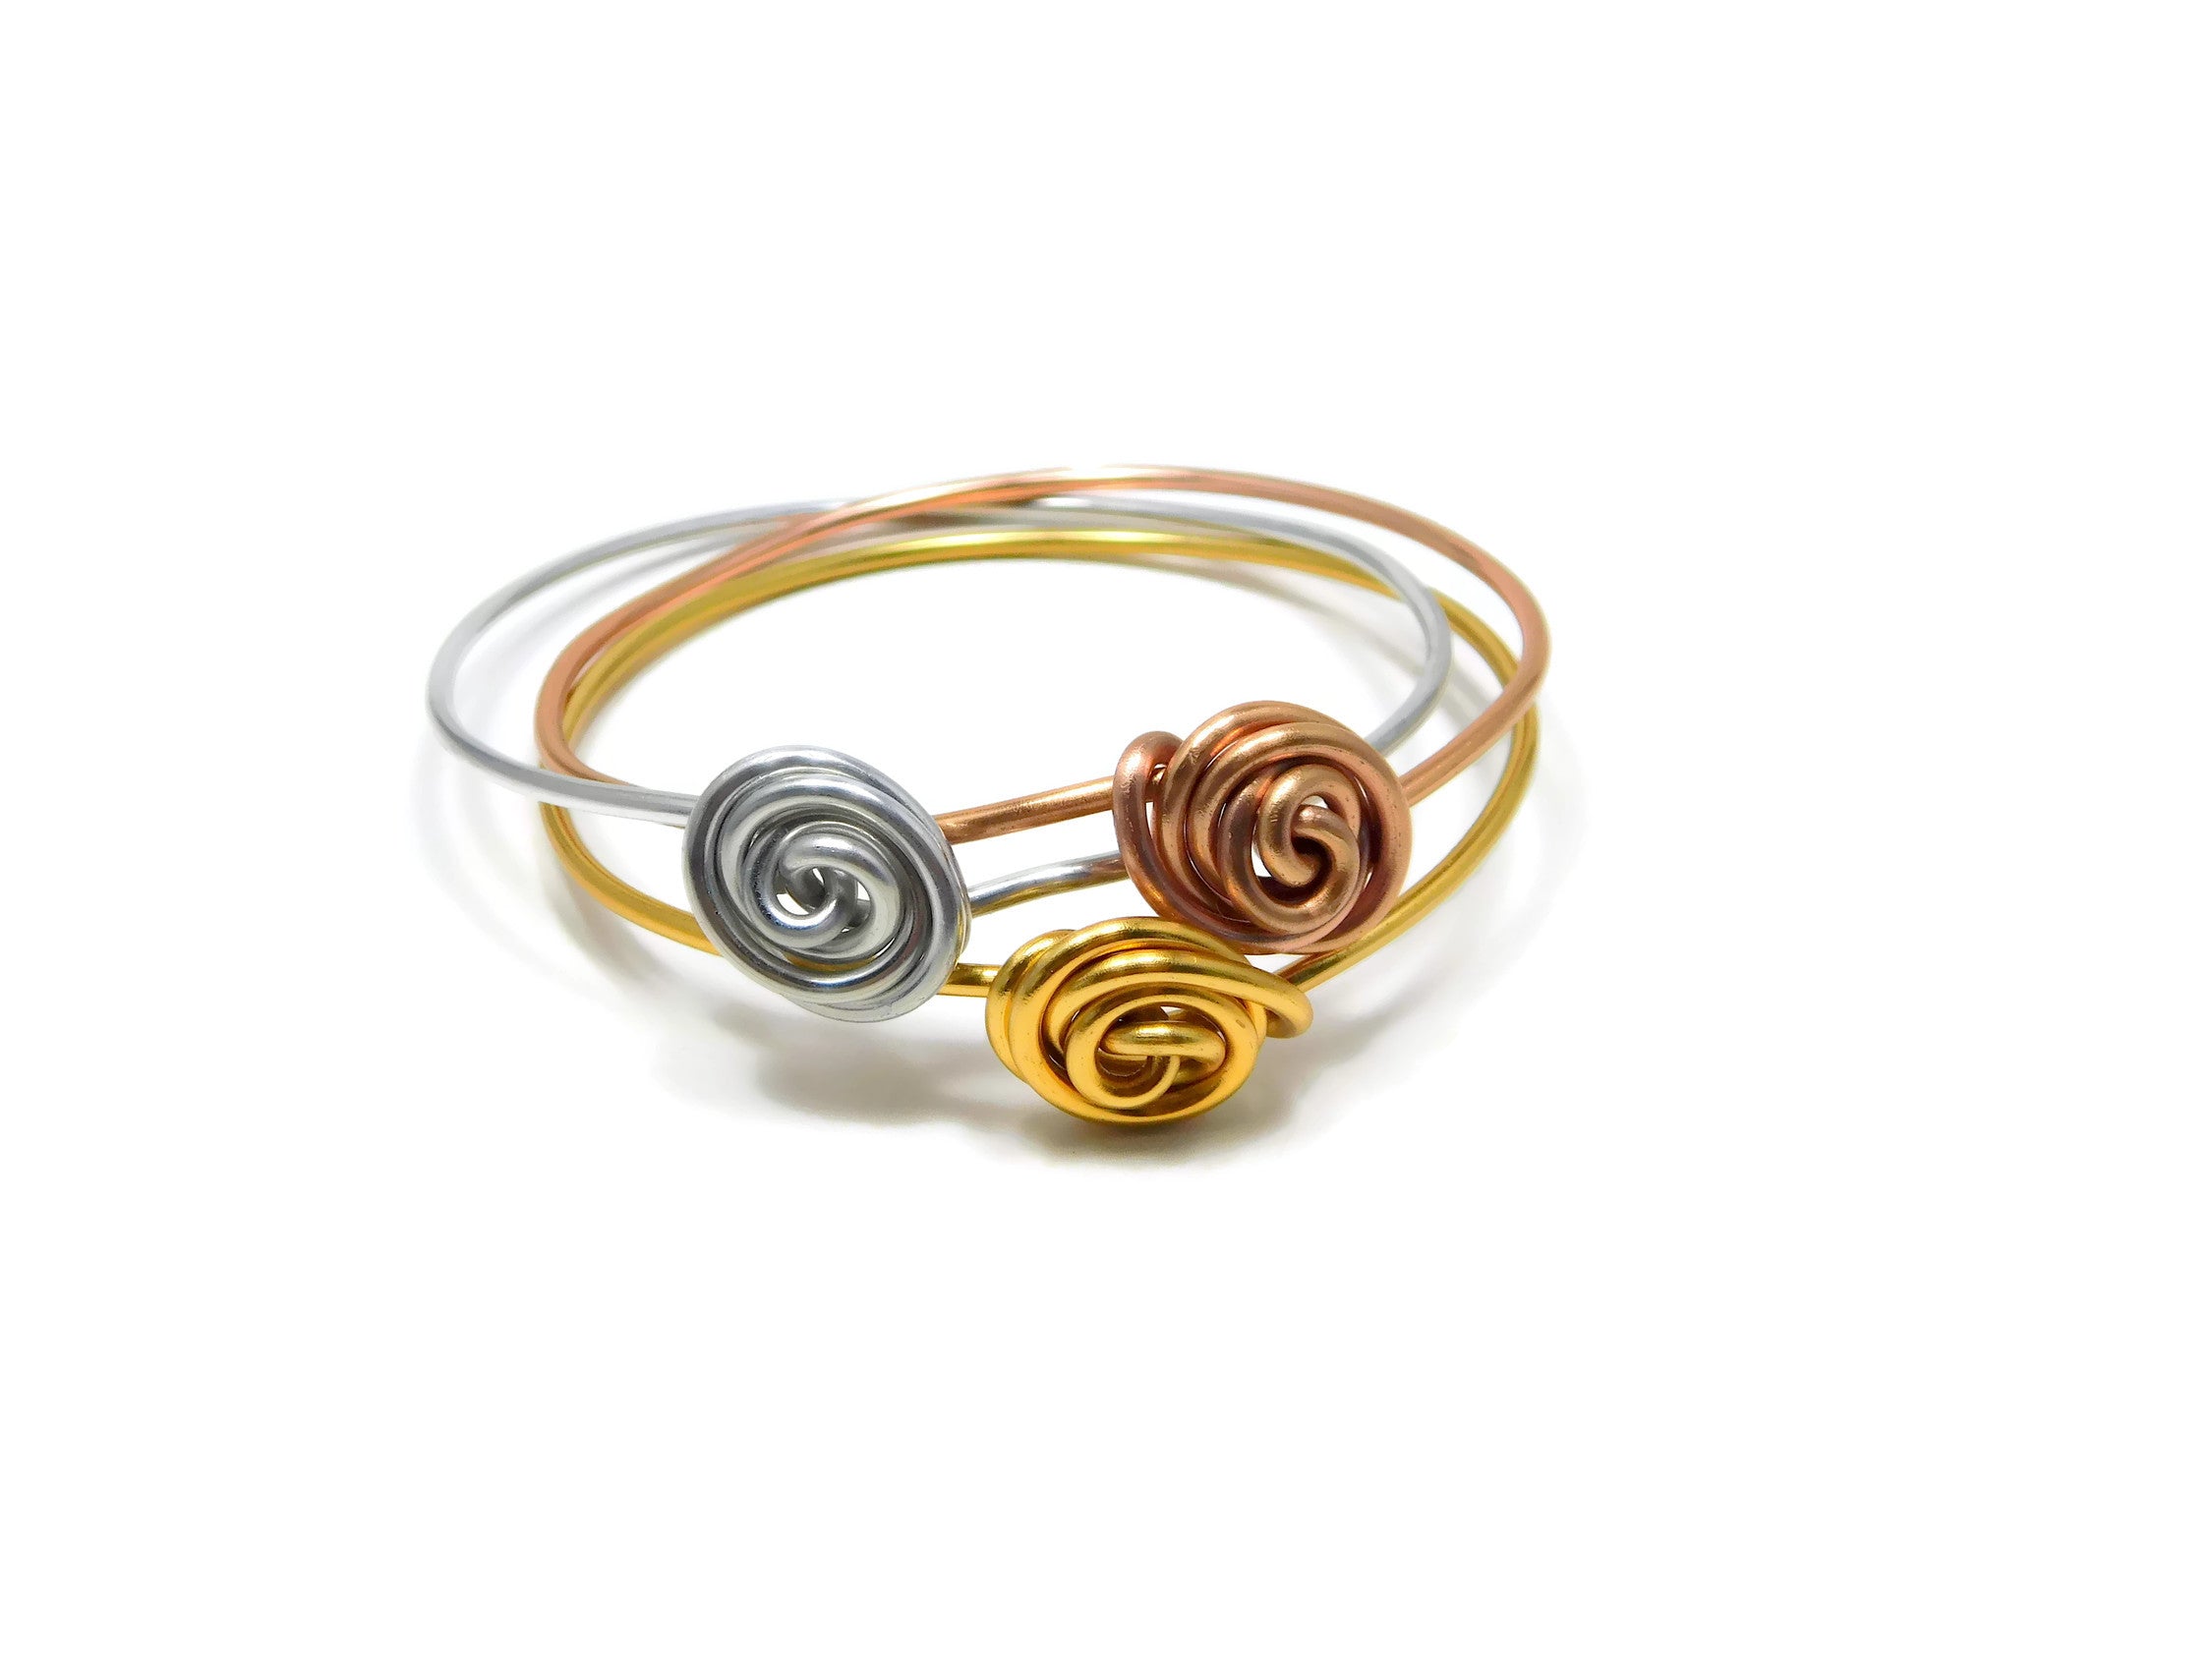 Stackable Rosette Bangle Bracelet DIY Wire Wrapping Kit